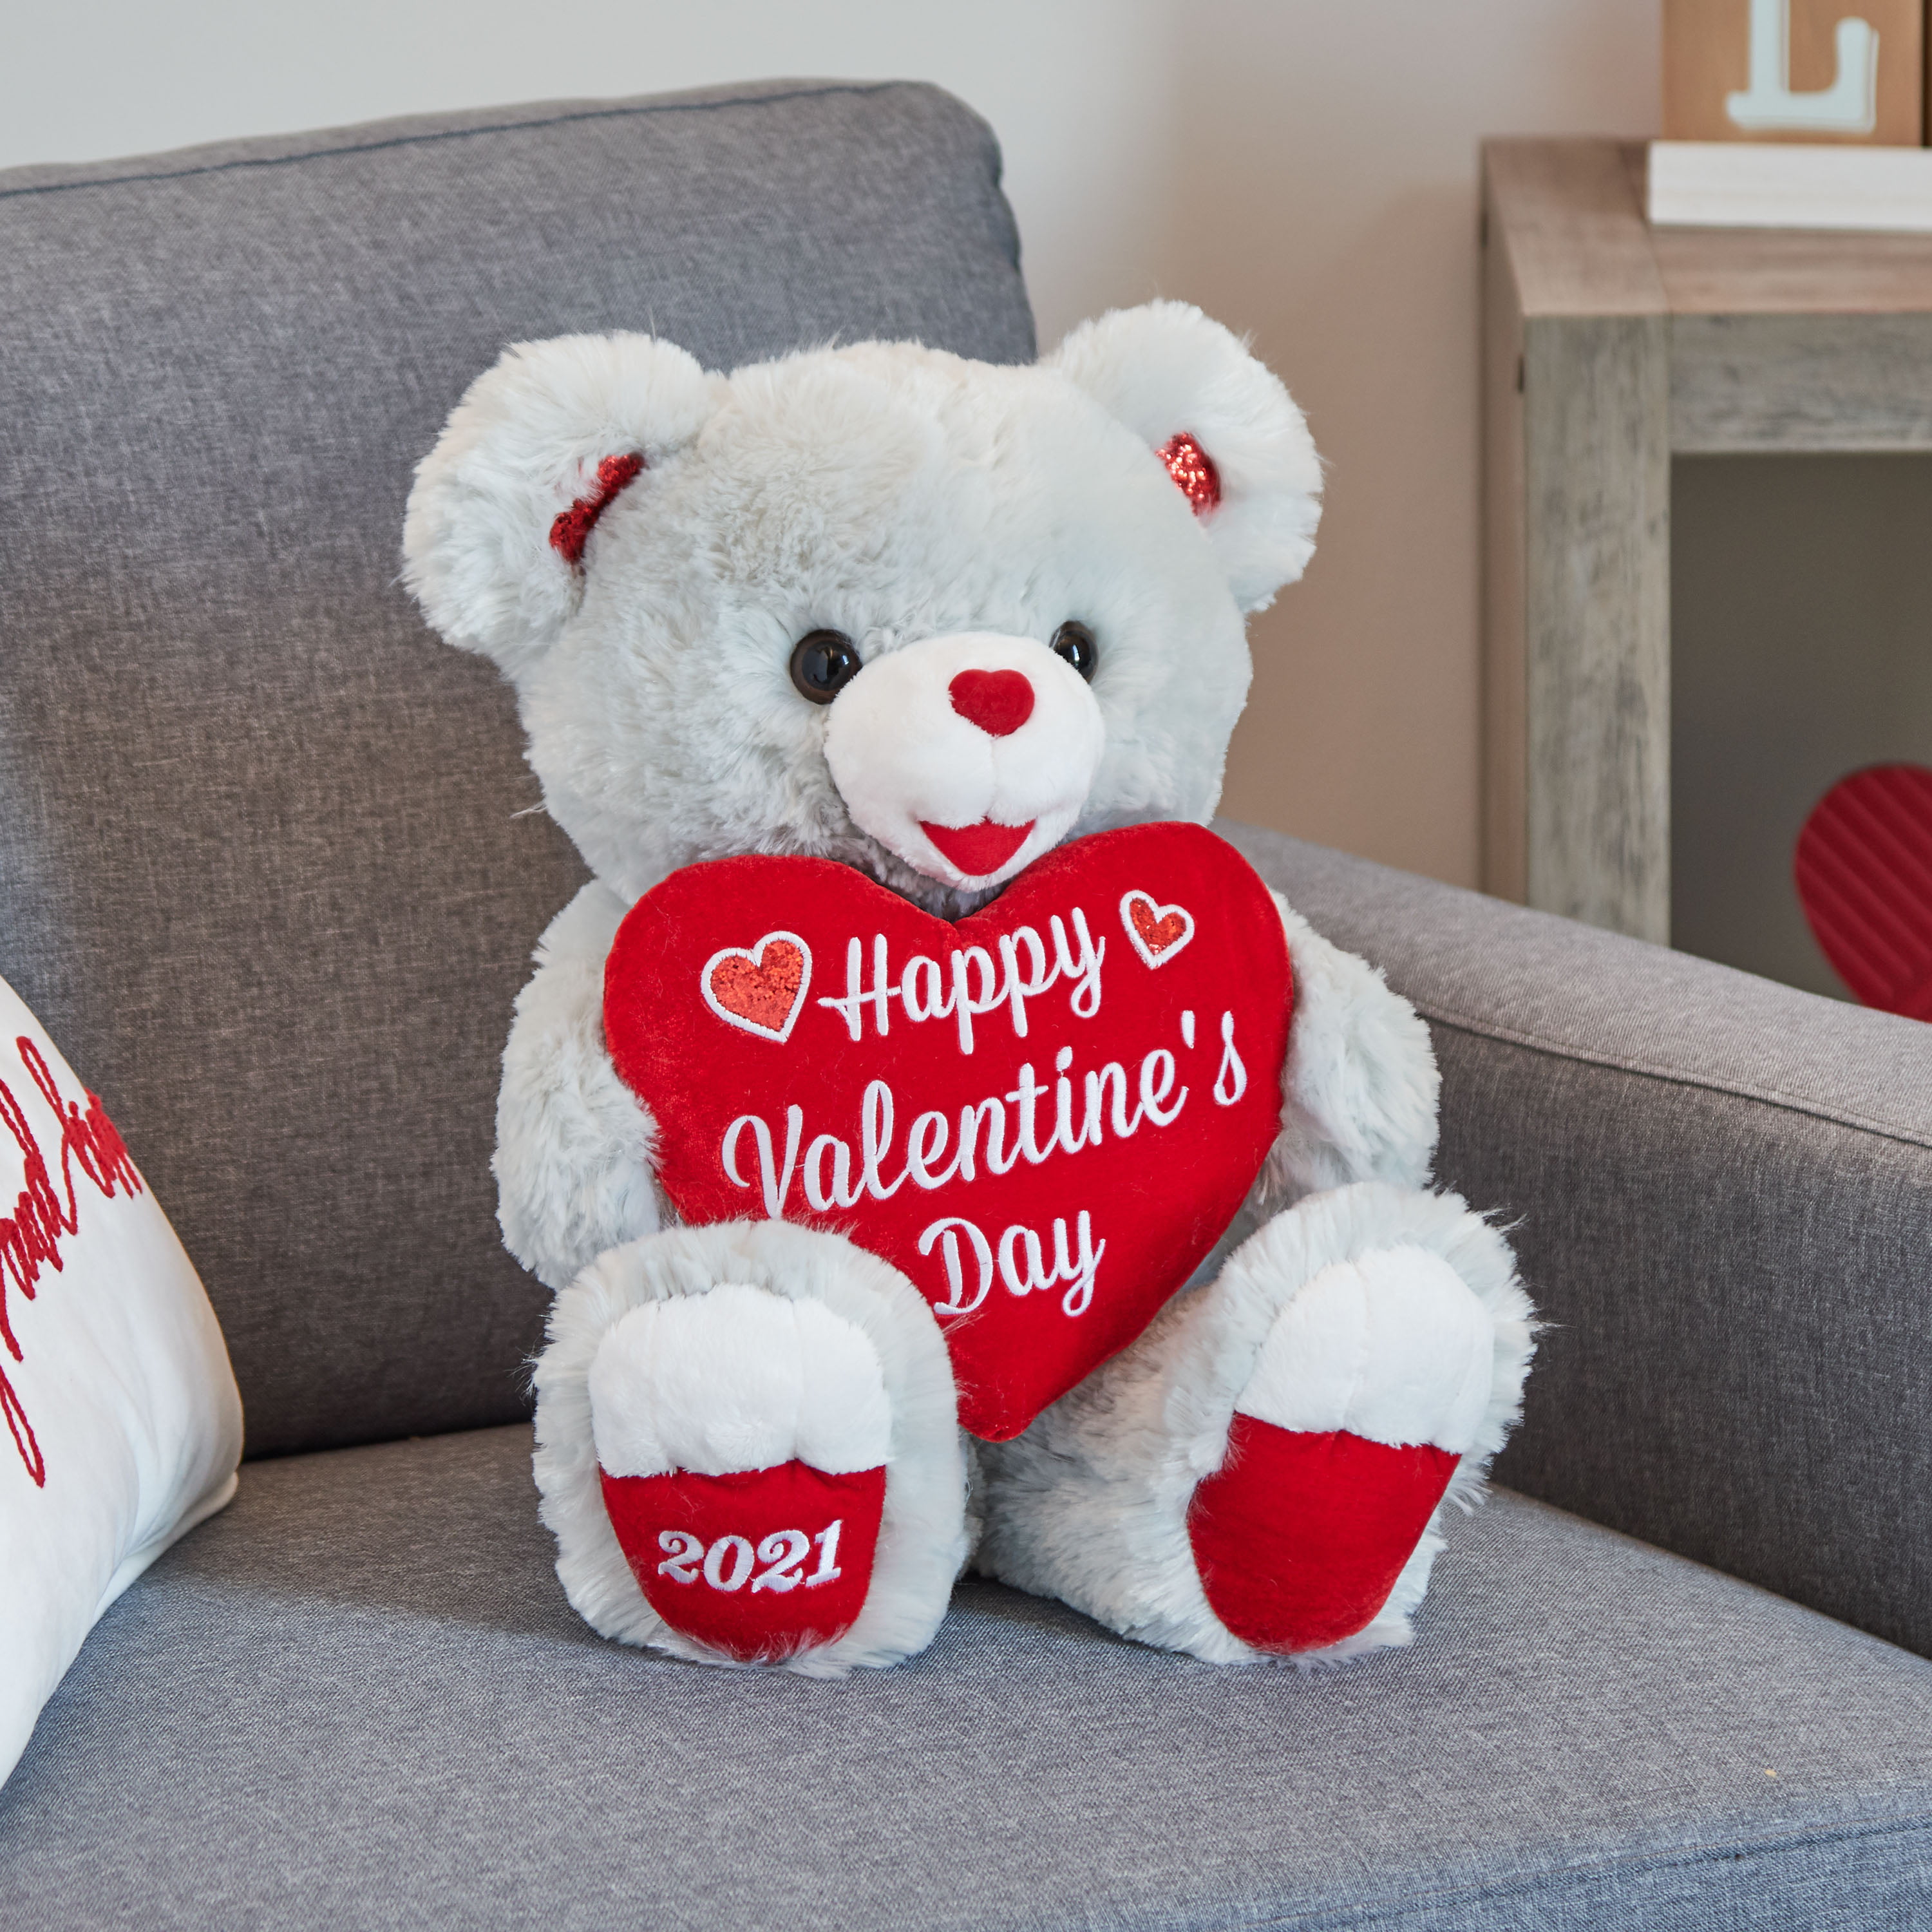 GIFT FOR YOU ❤Valentine's Day Sweetheart Teddy Bear 2021"Happy Valentine's Day' 